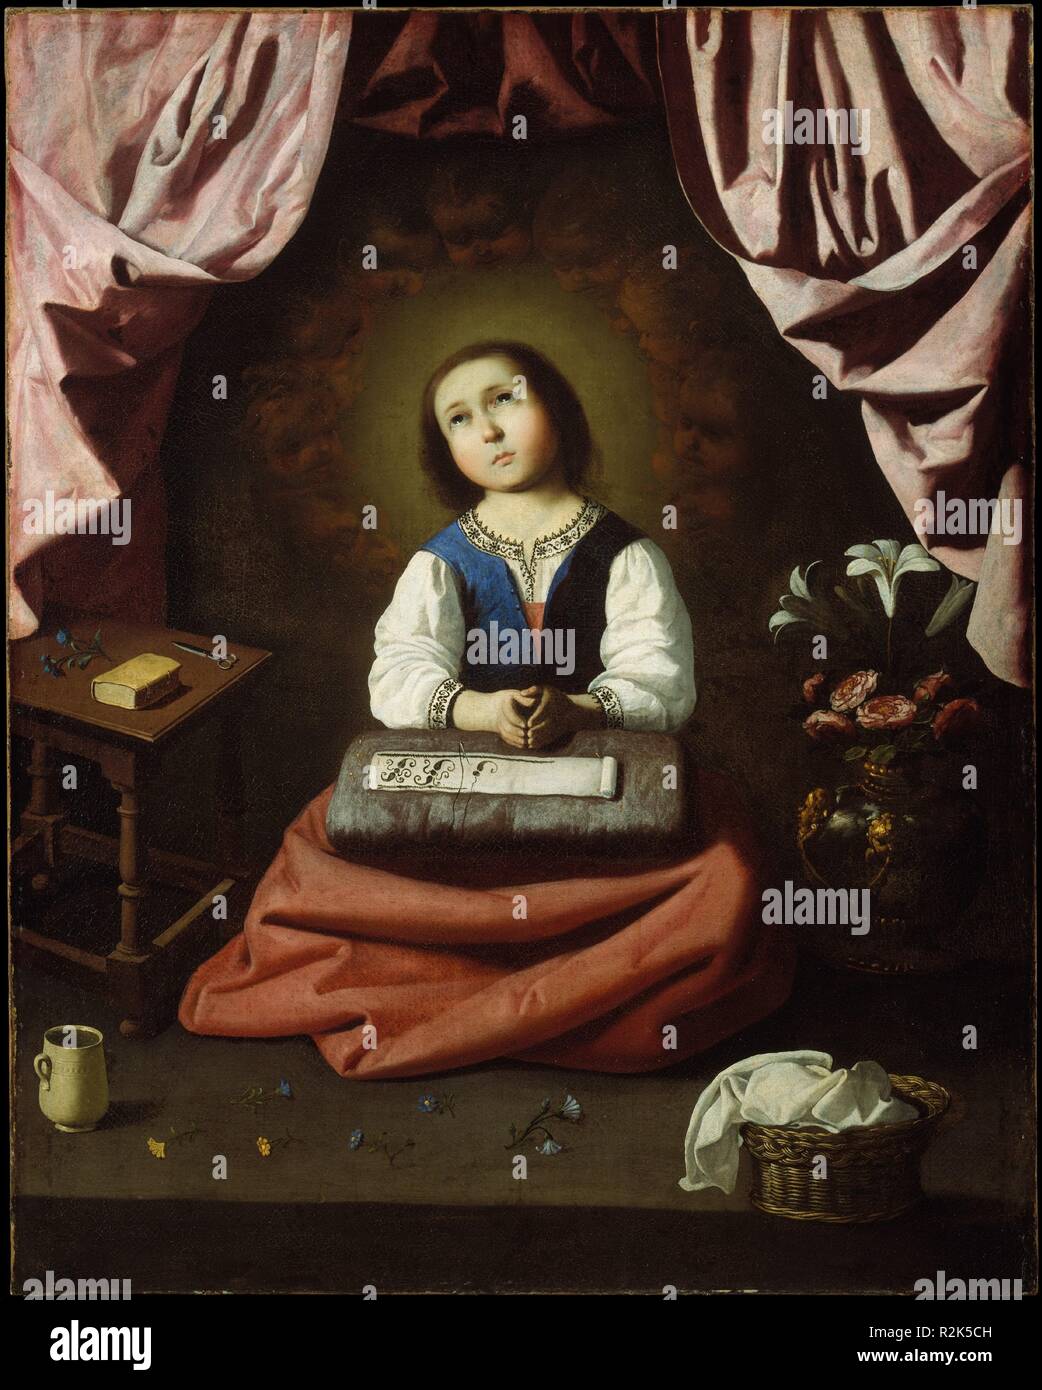 The Young Virgin. Artist: Francisco de Zurbarán (Spanish, Fuente de Cantos 1598-1664 Madrid). Dimensions: 46 x 37 in. (116.8 x 94 cm). Date: ca. 1632-33.  The subject of Zurbarán's painting is the young Virgin Mary. According to medieval legend, she lived as a girl in the Temple in Jerusalem, where she devoted herself to praying and sewing vestments. This was a subject particularly popular in Italian and Spanish paintings of the seventeenth century, with the Virgin serving as a model of behavior for young women. The delicate modeling of the Virgin's face and the attention to the still-life ele Stock Photo